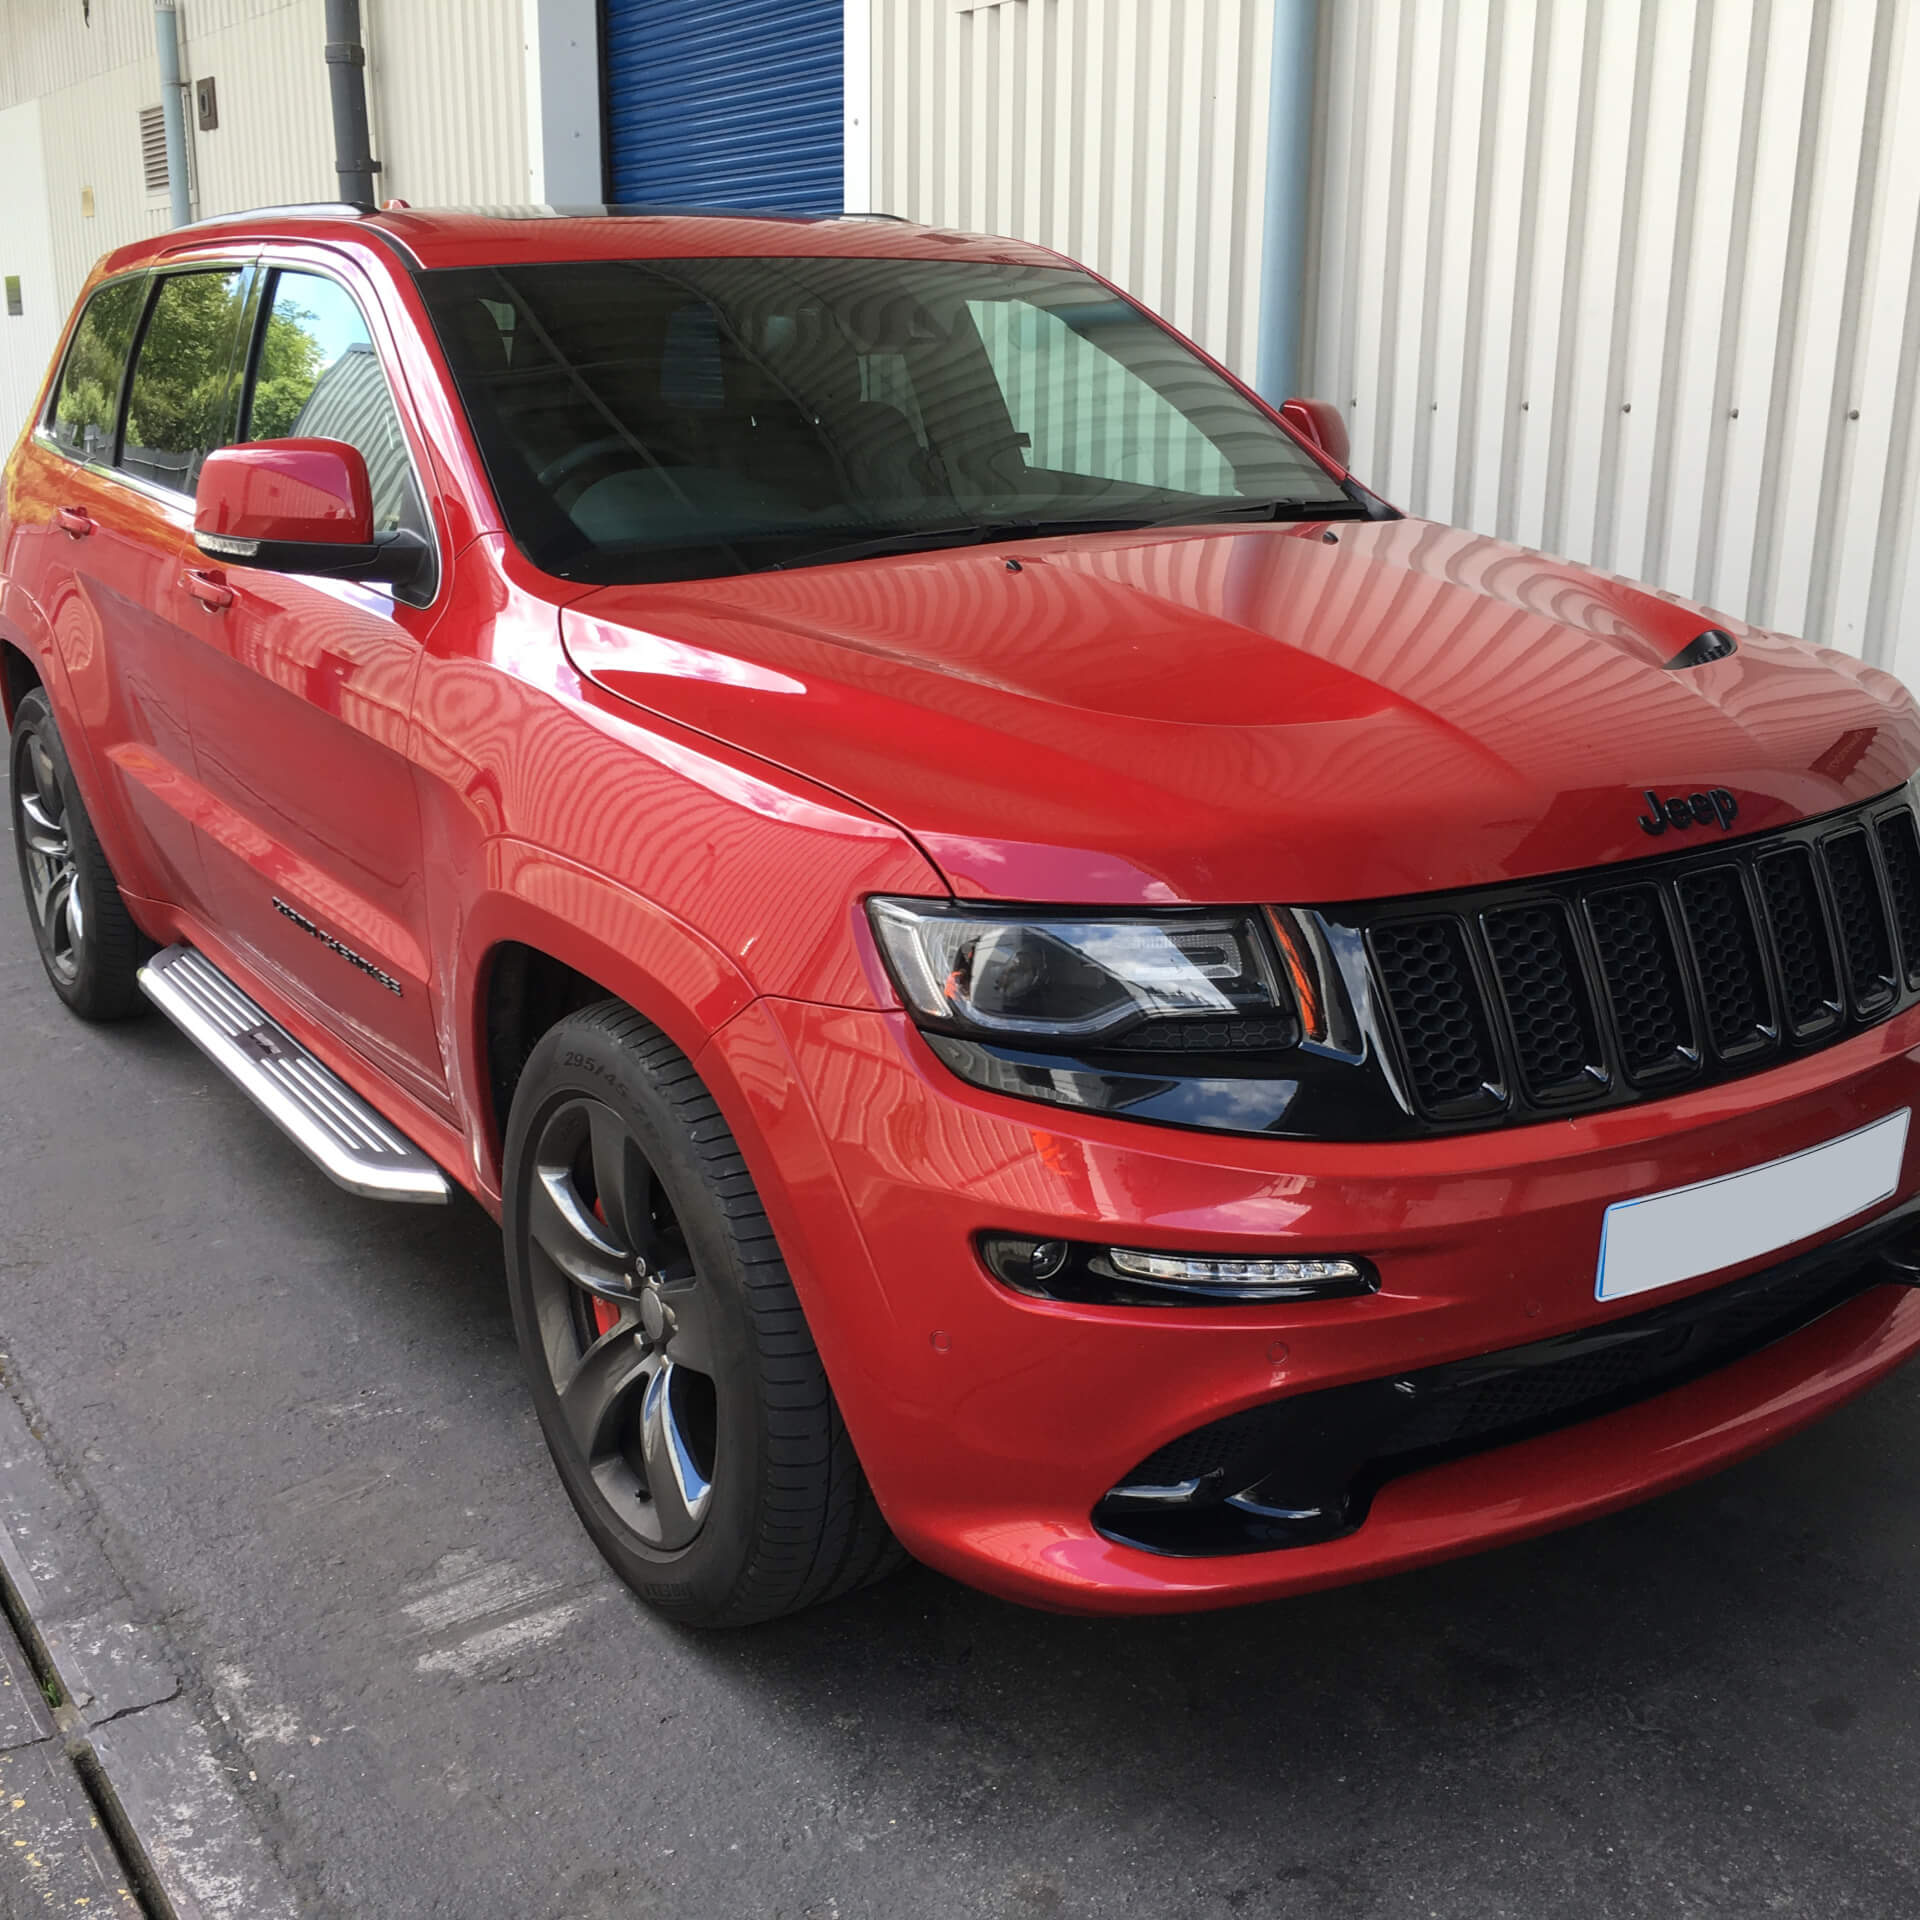 Direct4x4 accessories for Jeep Grand Cherokee vehicles with a photo of a red and black Jeep Grand Cherokee outside our depot fitted with our premier side steps